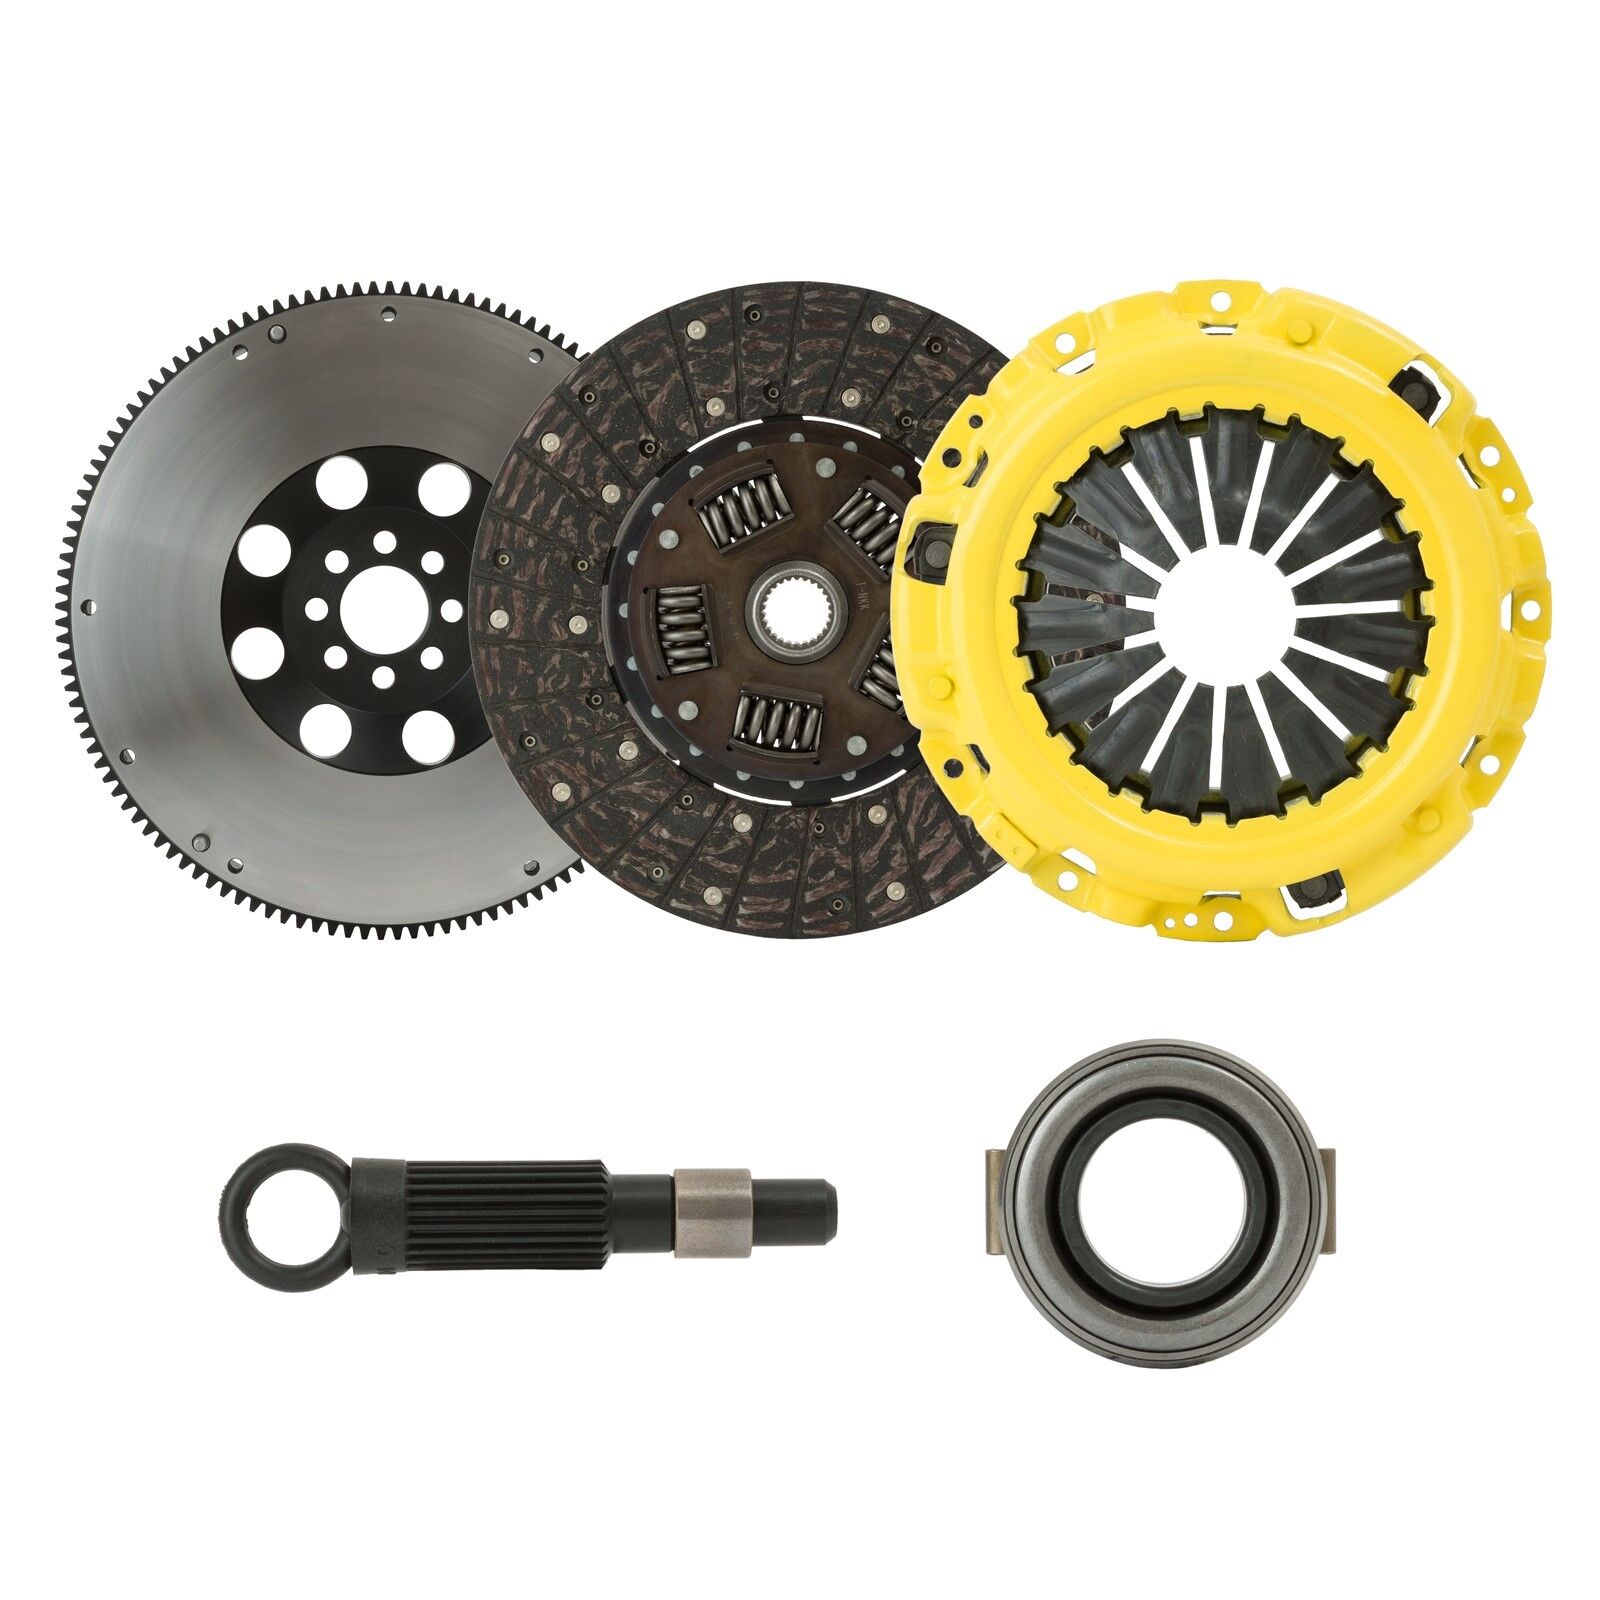 CLUTCHXPERTS STAGE 2 CLUTCH KIT+FLYWHEEL fits WRX FORESTER XT LEGACY TURBO